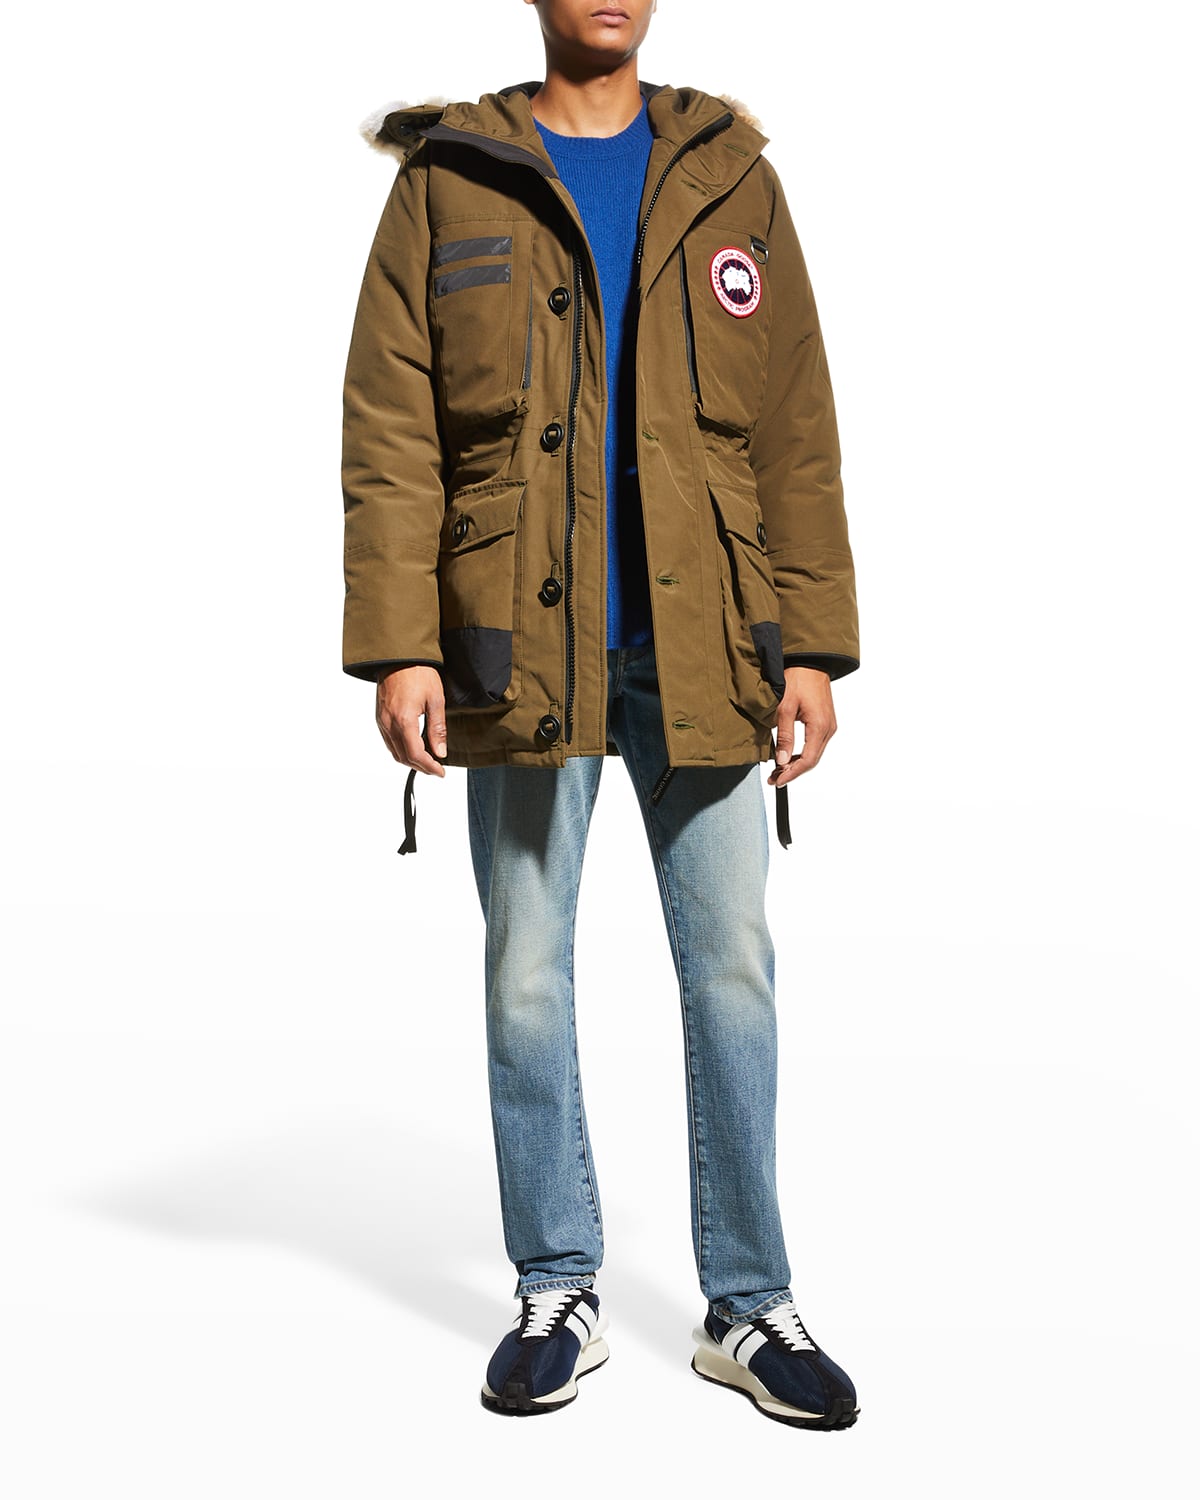 Canada Goose Chateau Arctic-Tech Parka with Fur Hood